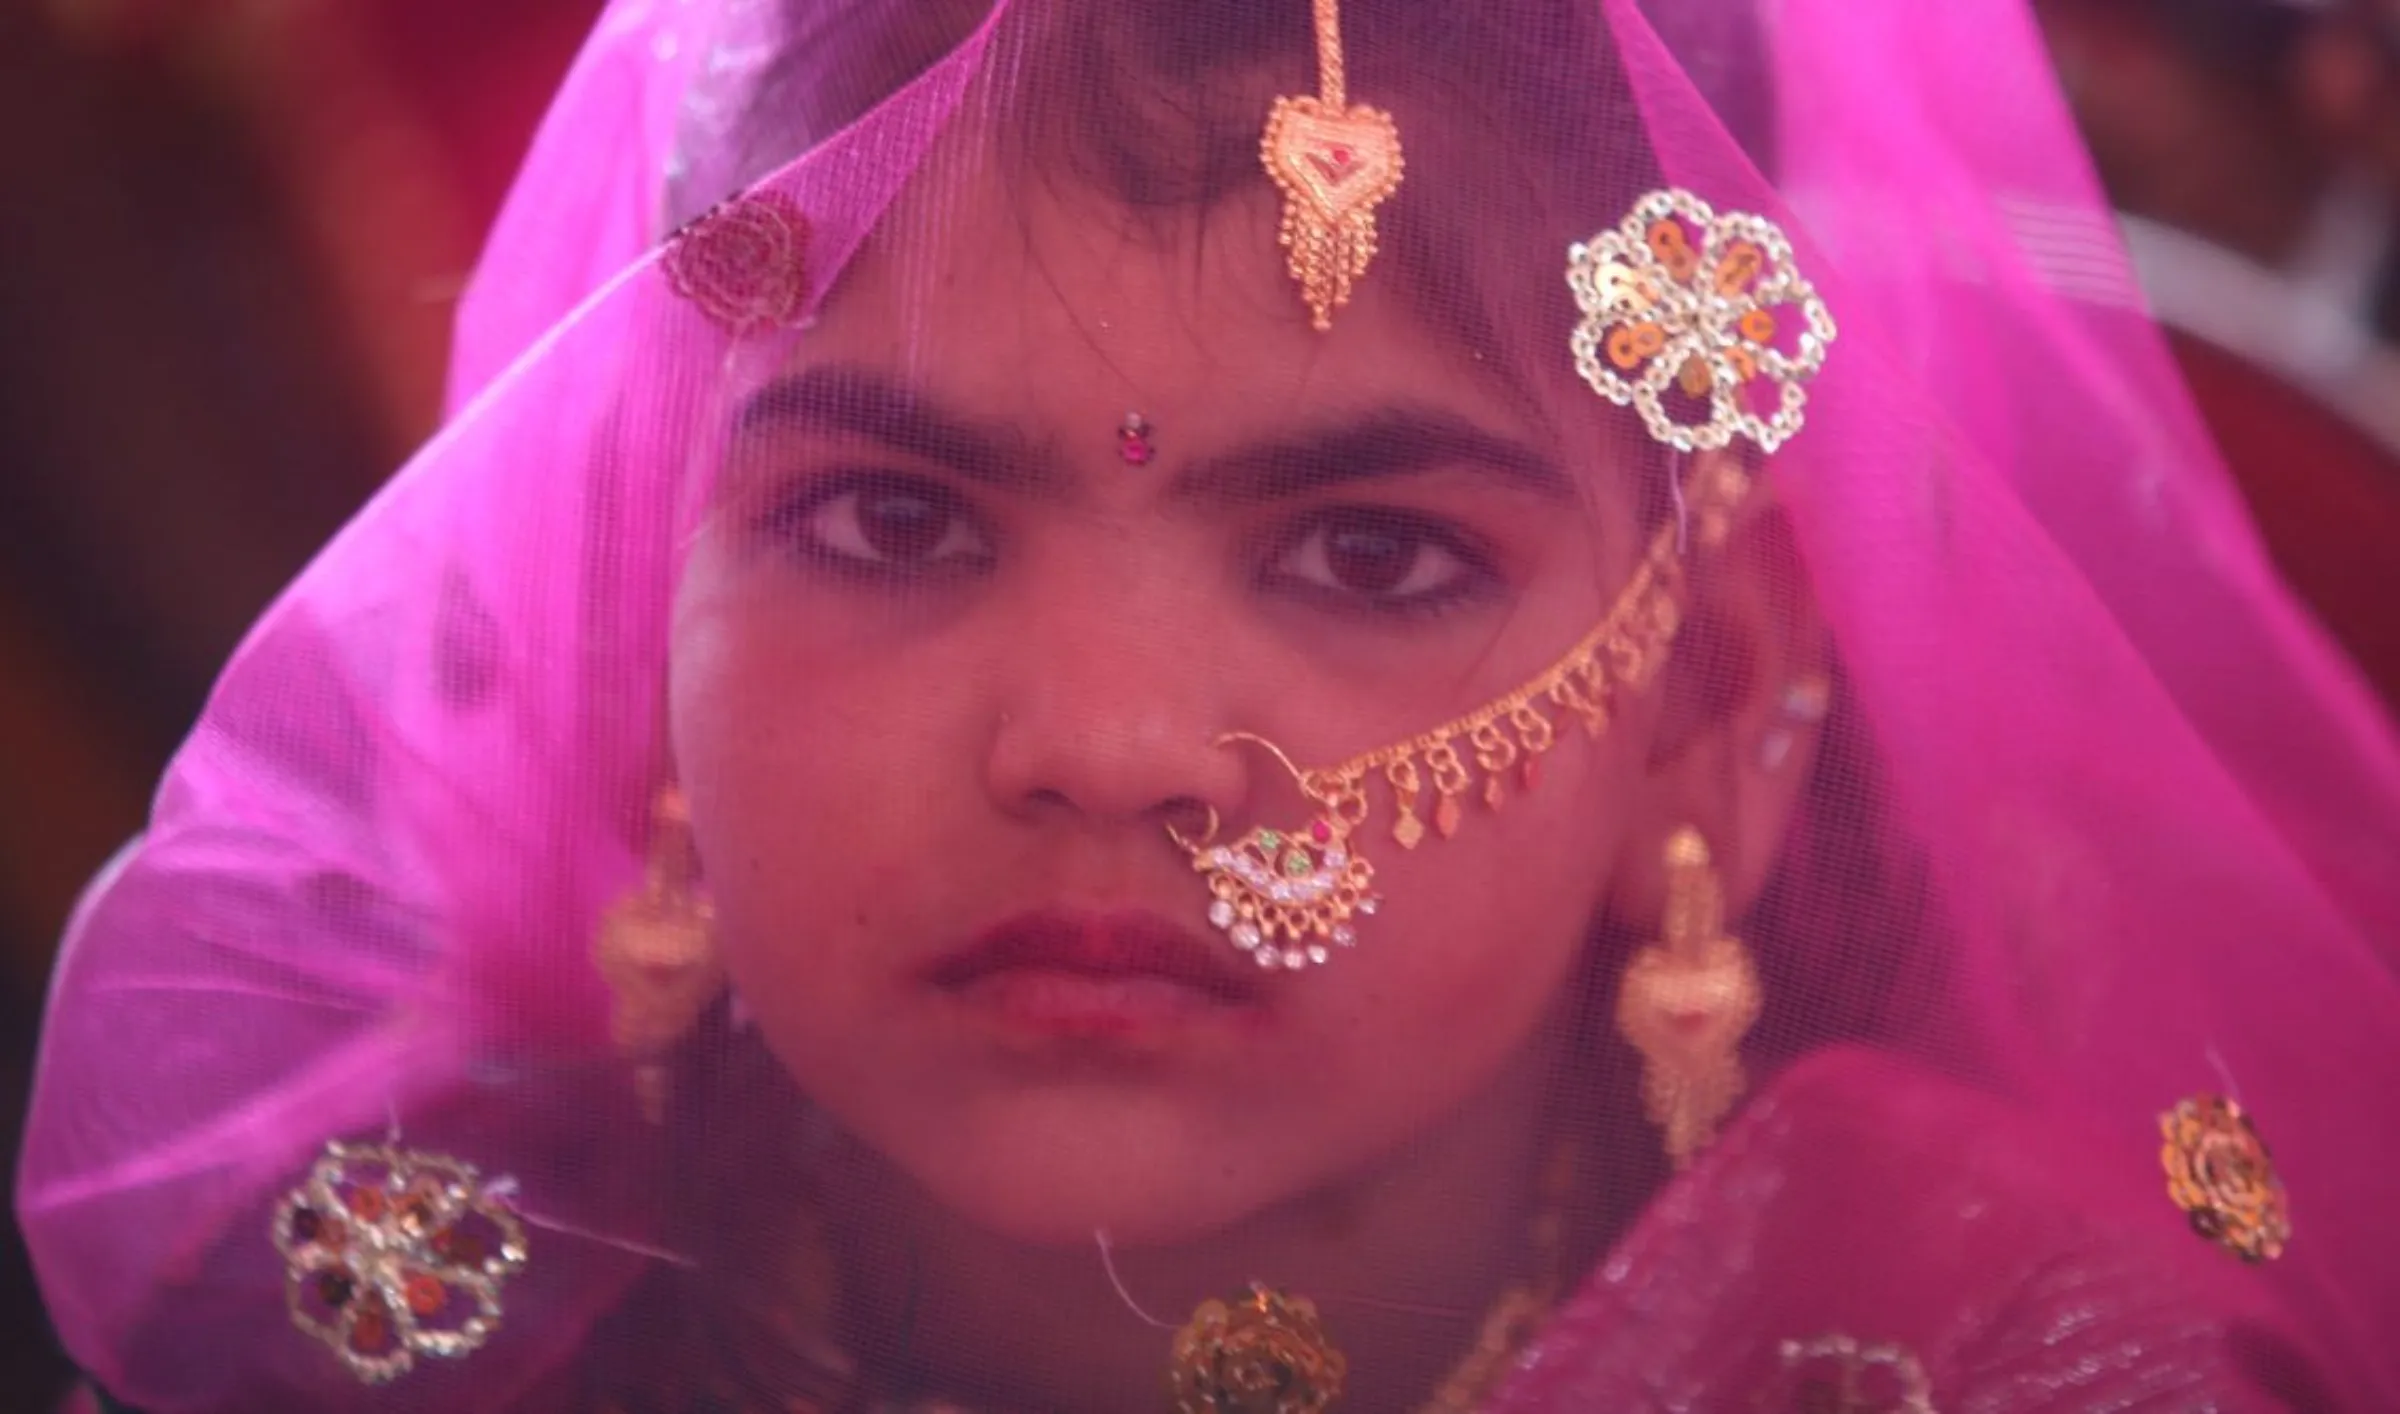 A veiled girl from the Saraniya community waits for her engagement ceremony to start at Vadia village in the western Indian state of Gujarat March 11, 2012